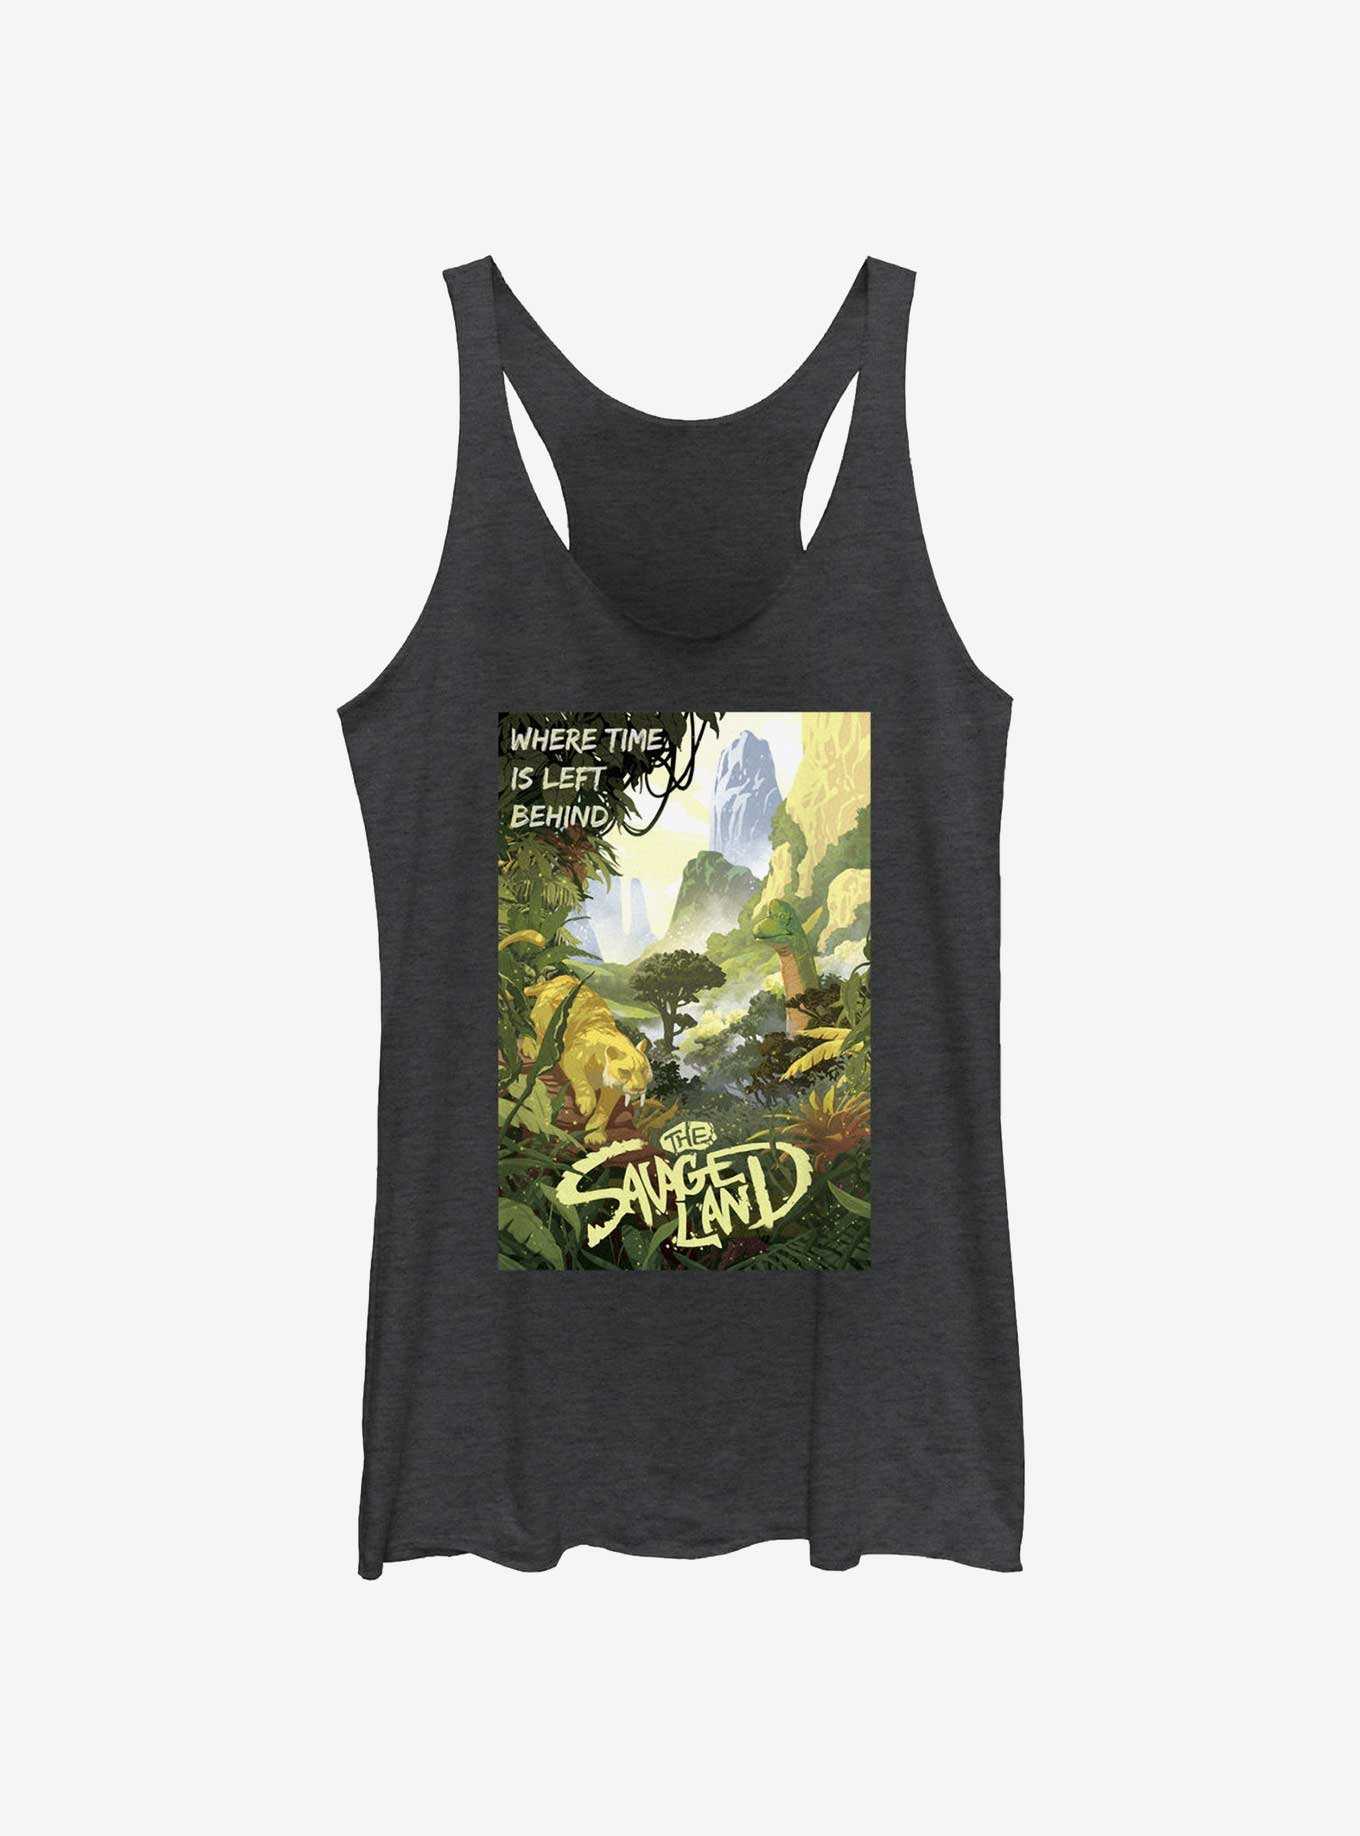 Marvel Avengers The Savageland Quote Womens Tank Top, , hi-res